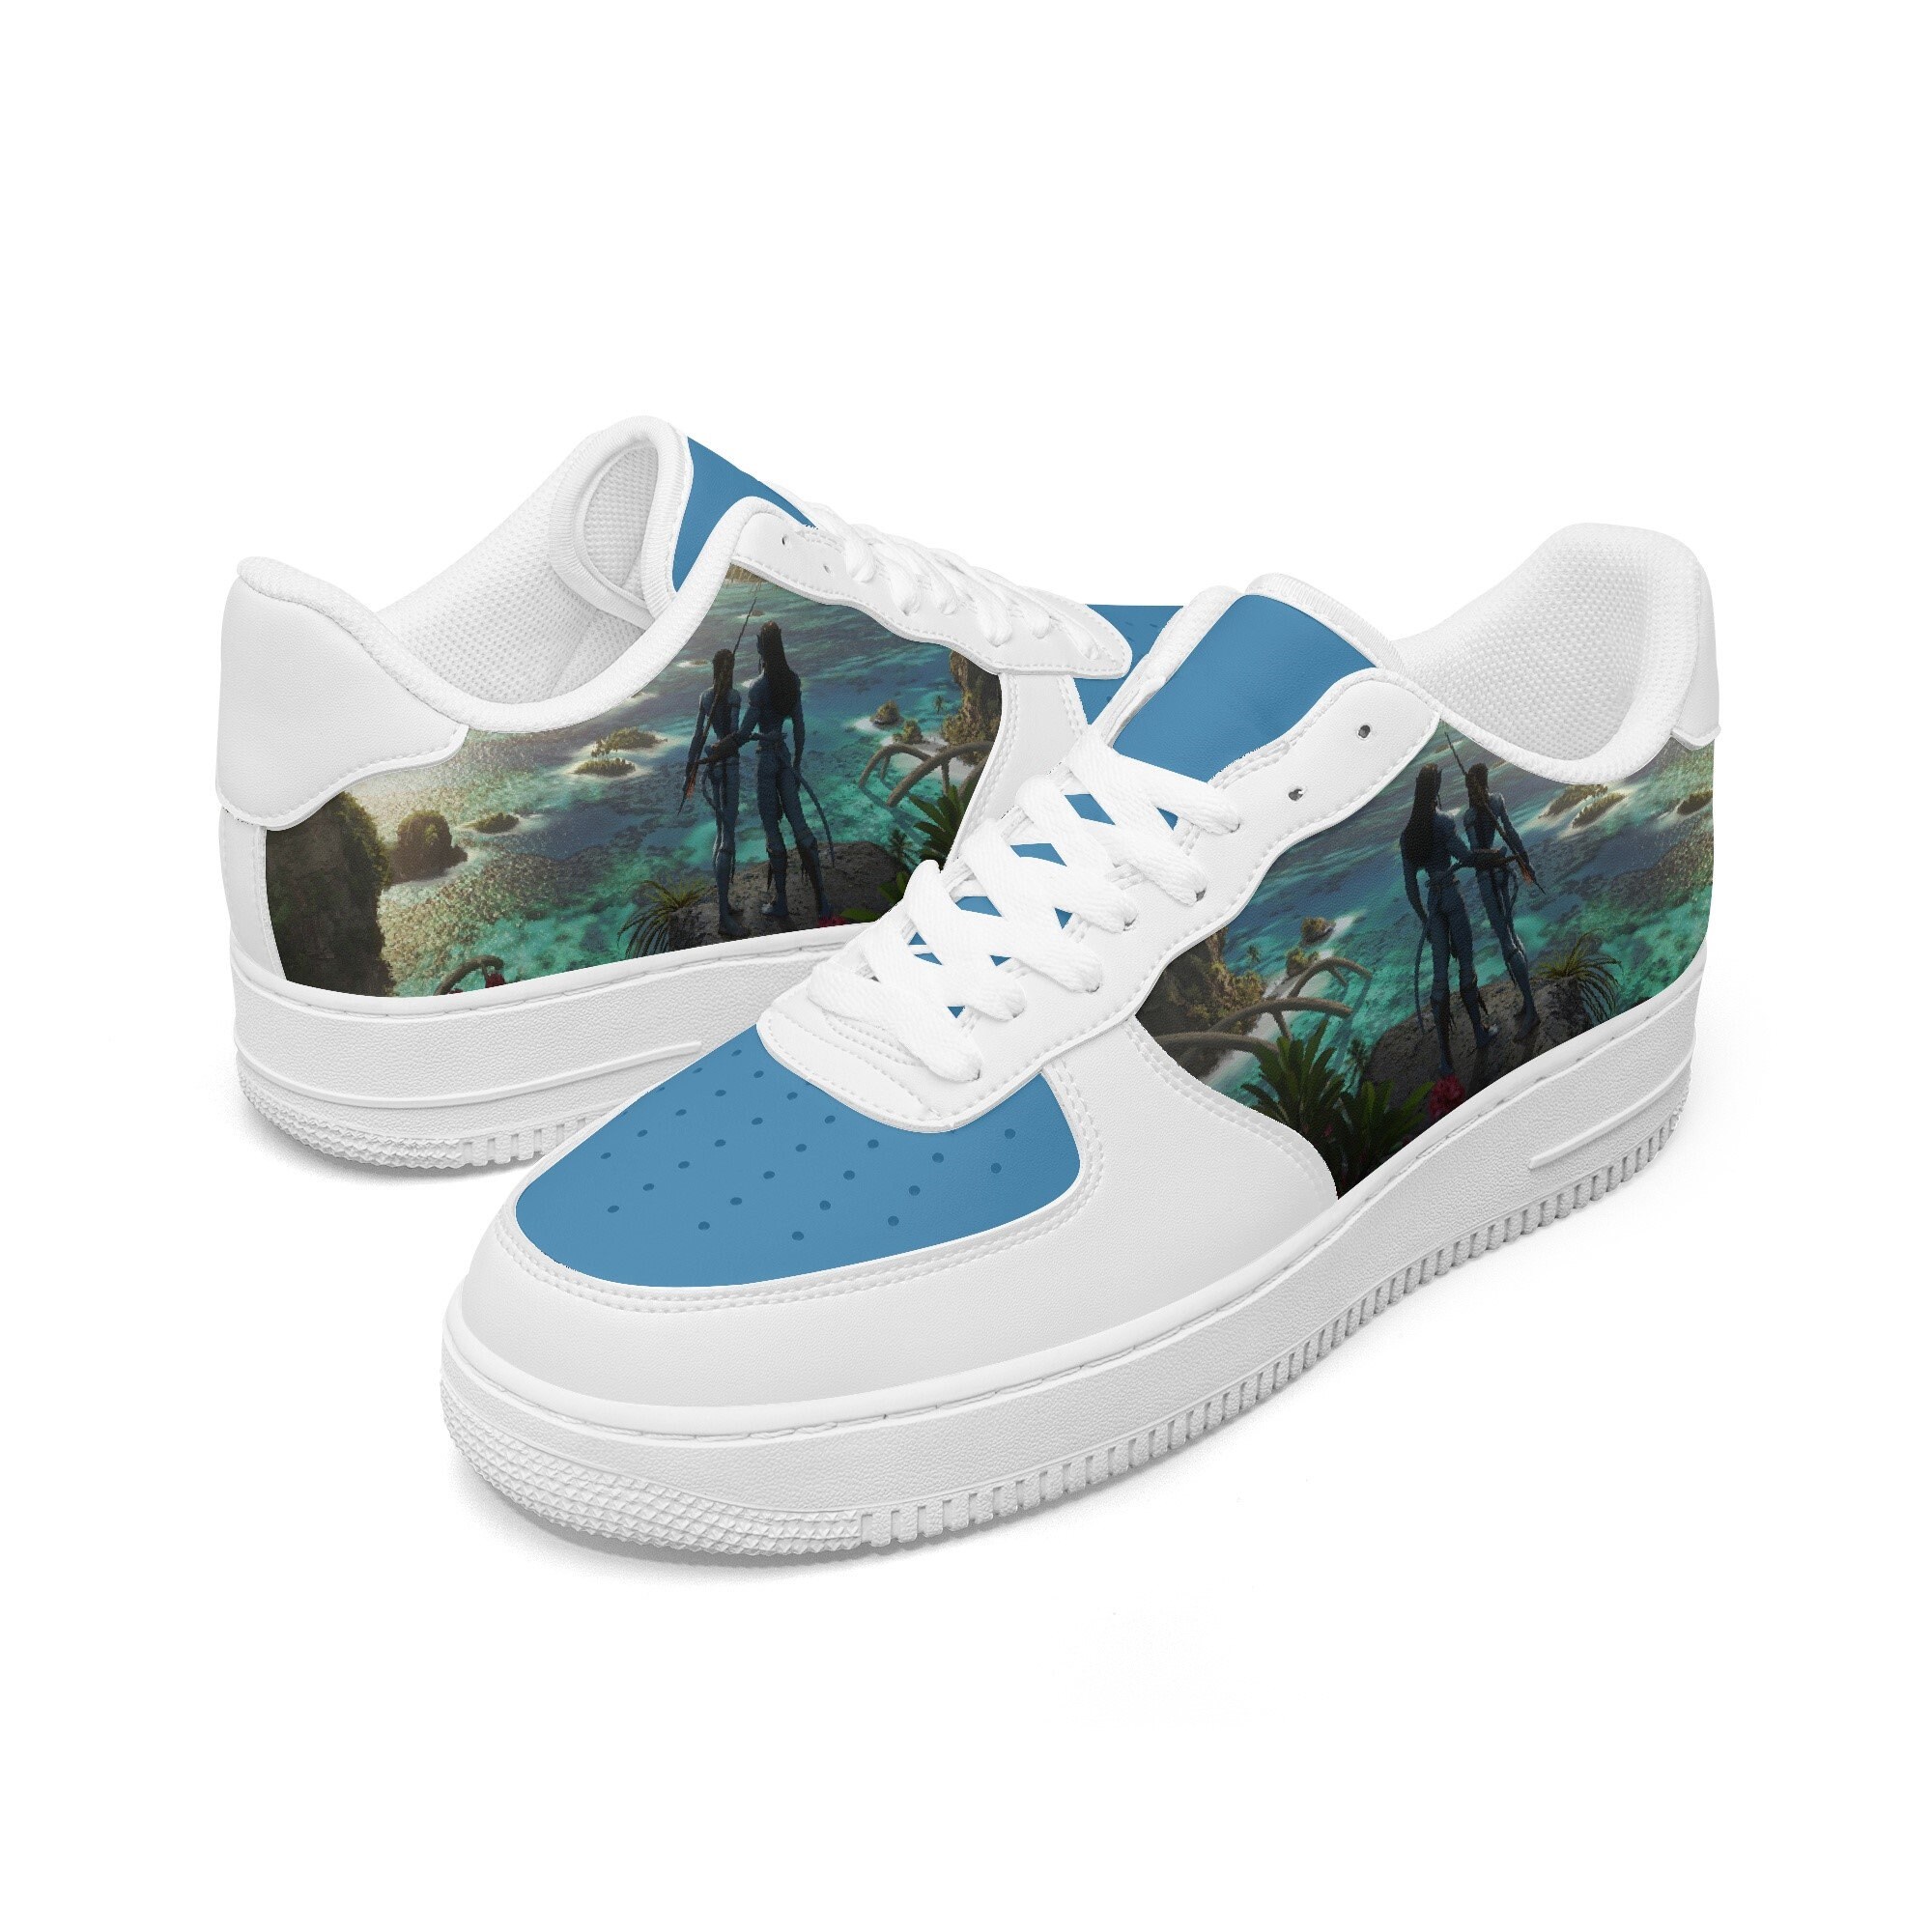 Avatar Shoes the Way of Water Sneakers Leather Low Tops for - Etsy